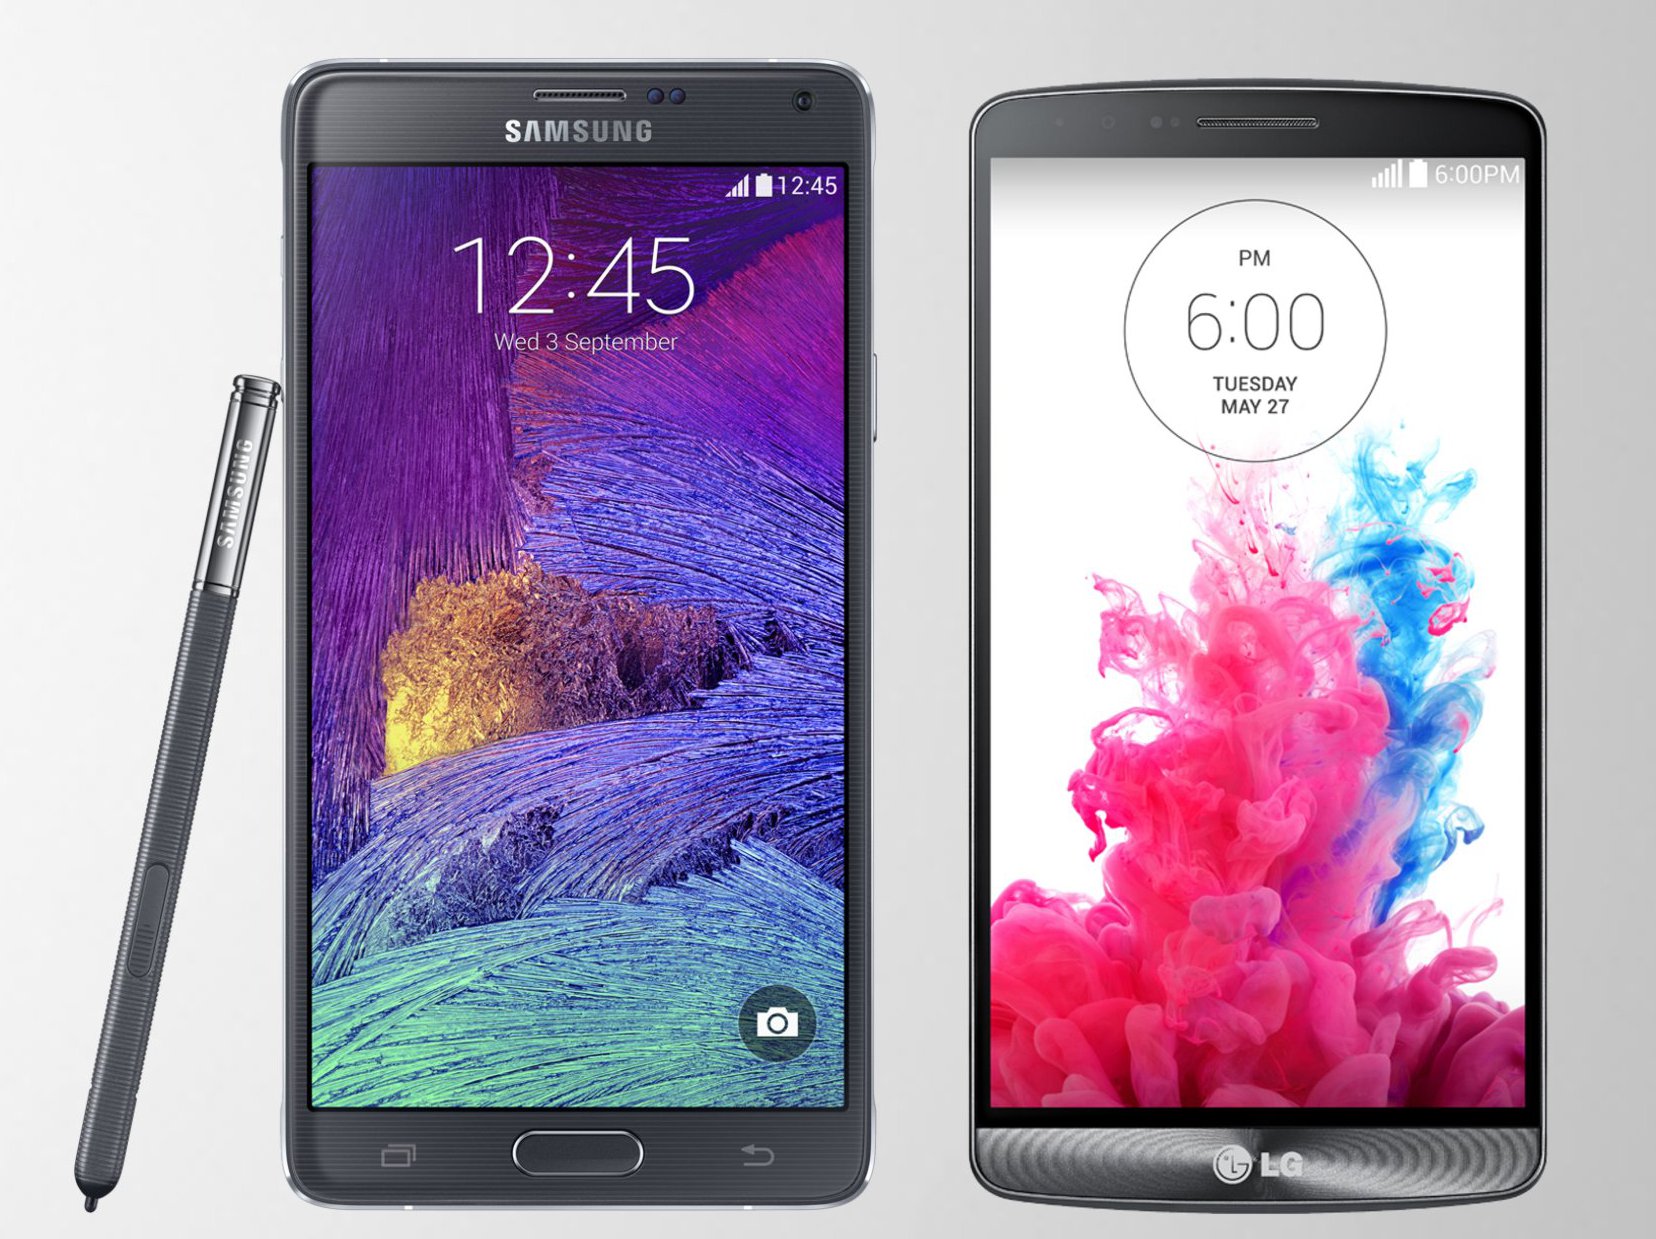 Galaxy Note 4 And LG G3 Now Available On Sprint Lease Scheme